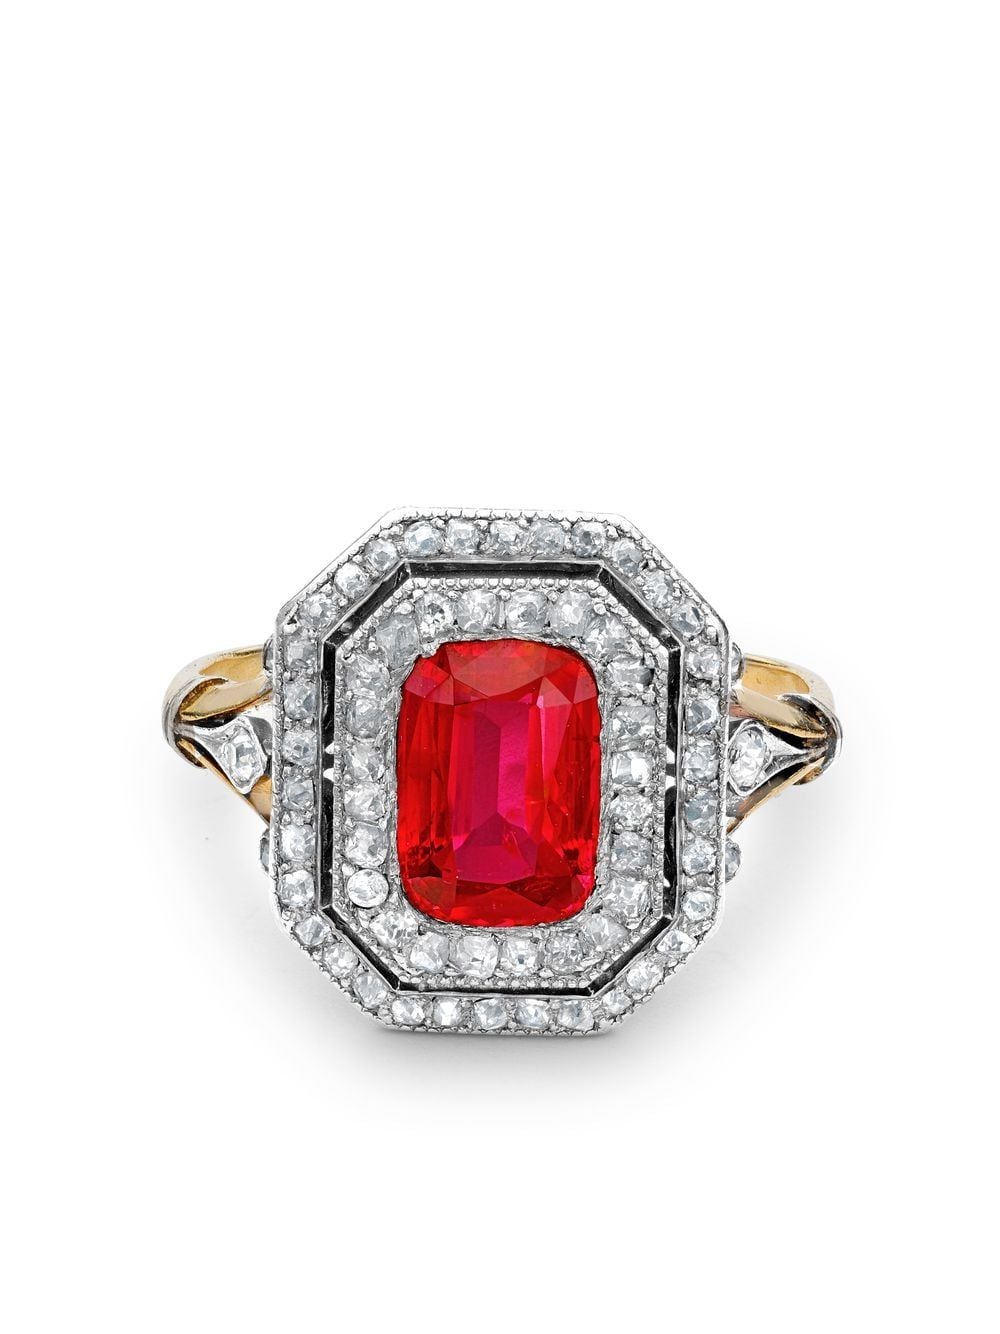 Pre-owned Pragnell Vintage Edwardian 18kt Yellow Gold And Platinum Ruby And Diamond Ring